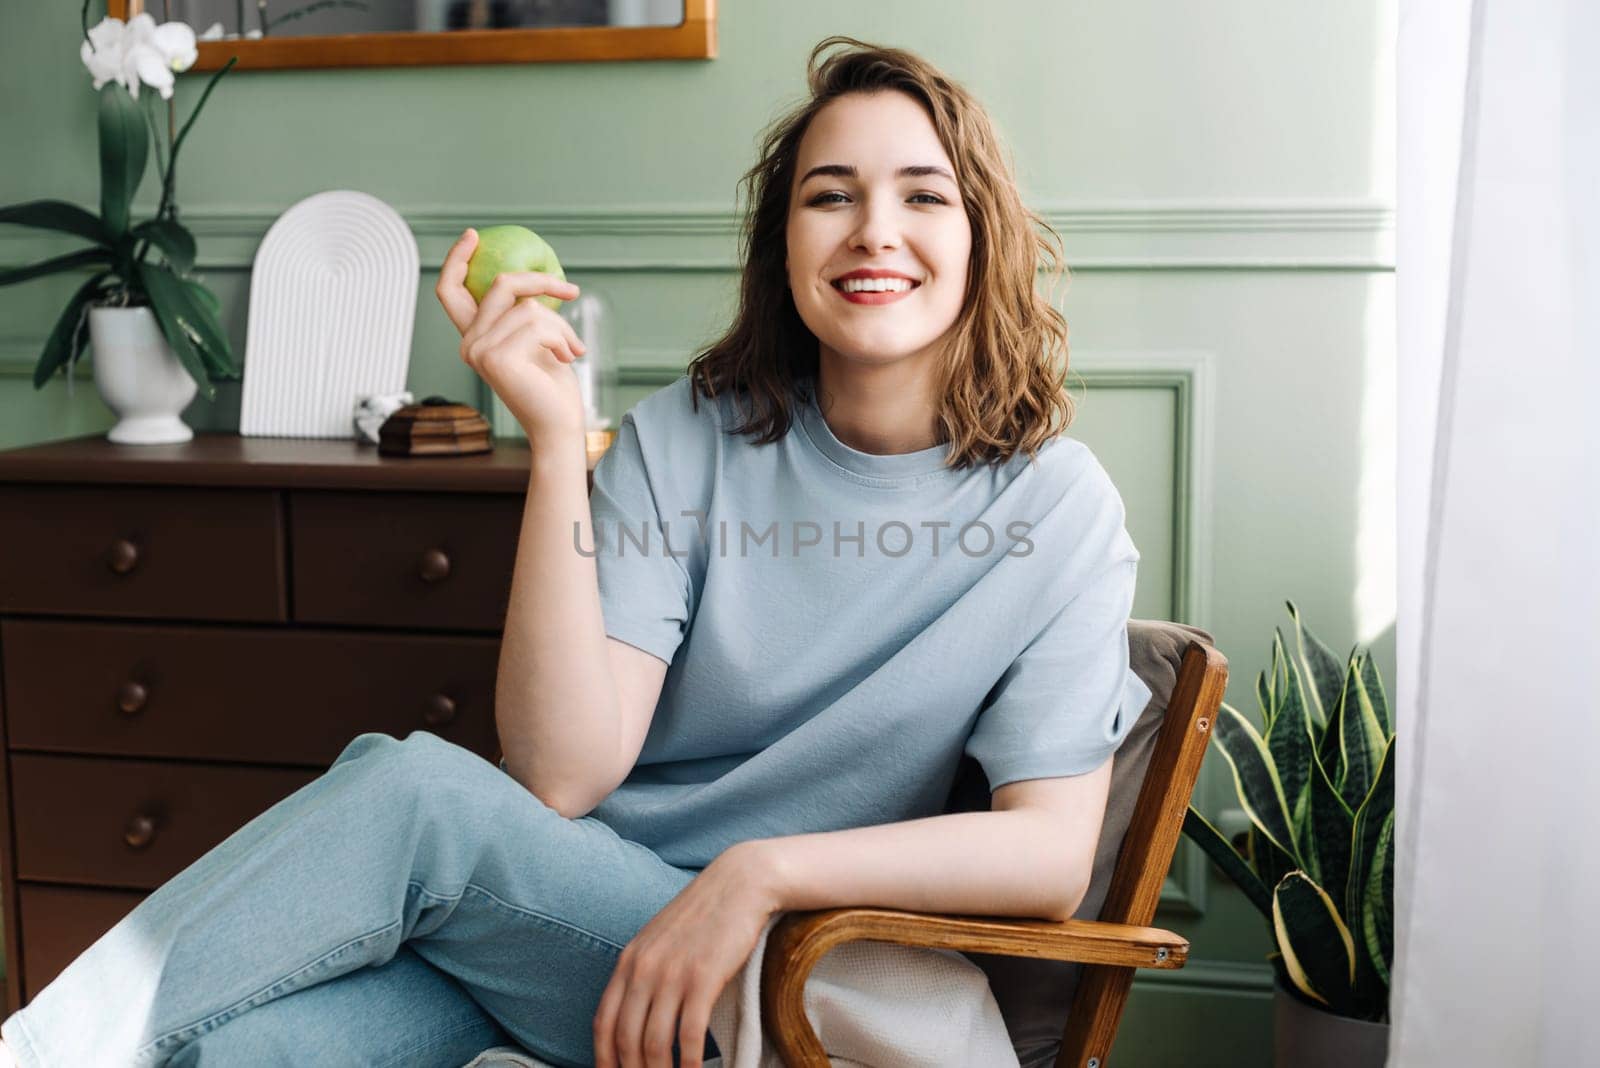 Joyful Young Woman Relaxing on Couch with Apple in Living Room. Cheerful Woman Sitting on Sofa Enjoying Apple in Living Room Scene. Leisure Time at Home.